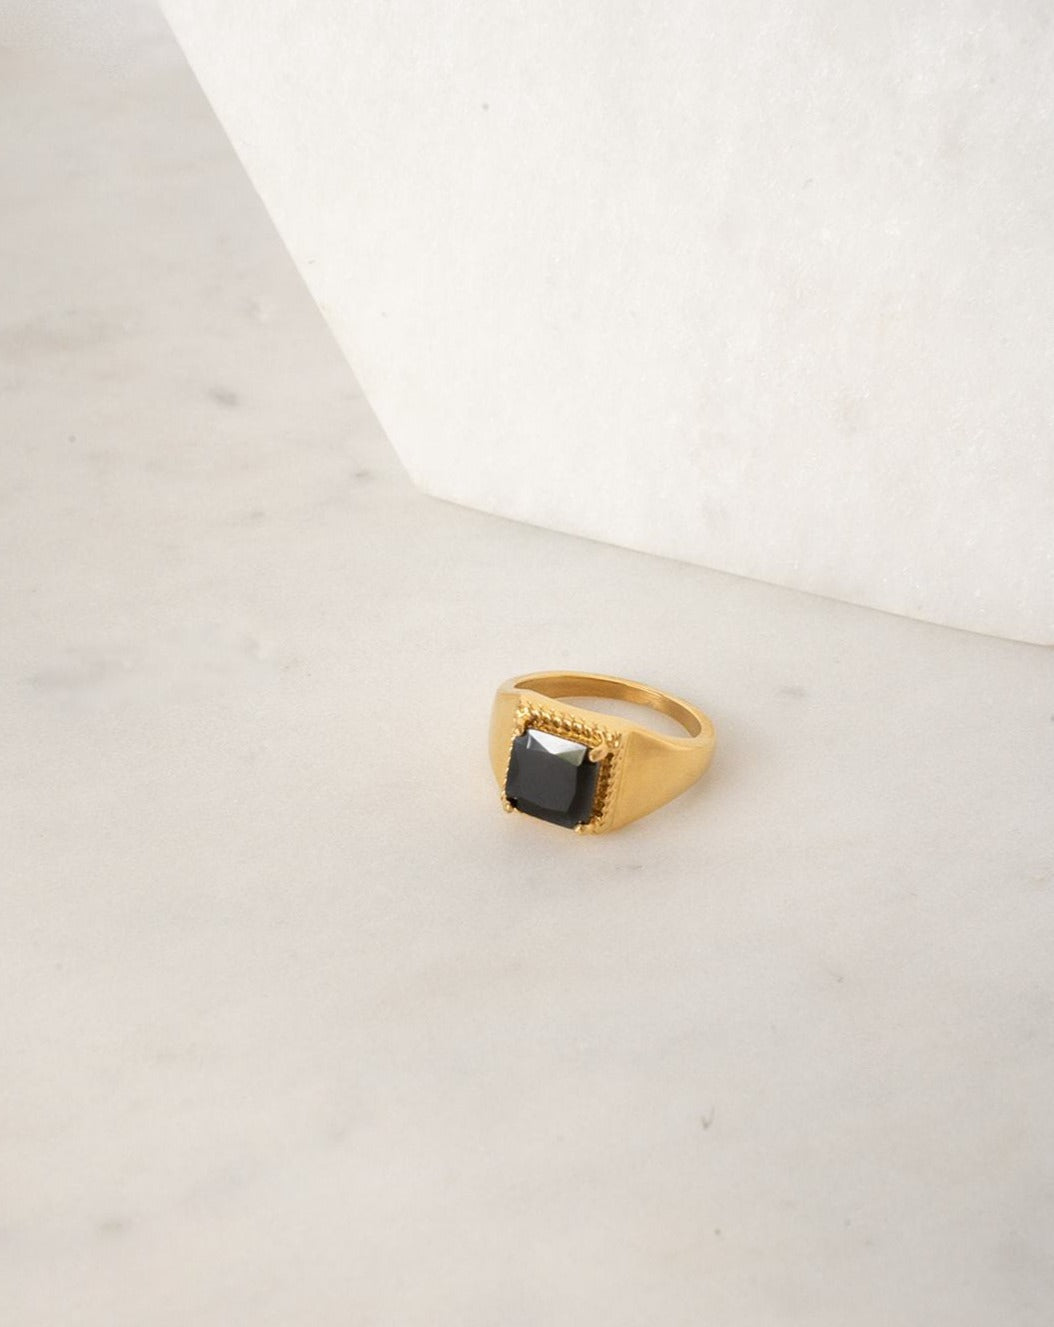 18k gold plated stainless steel ring with black cz stone